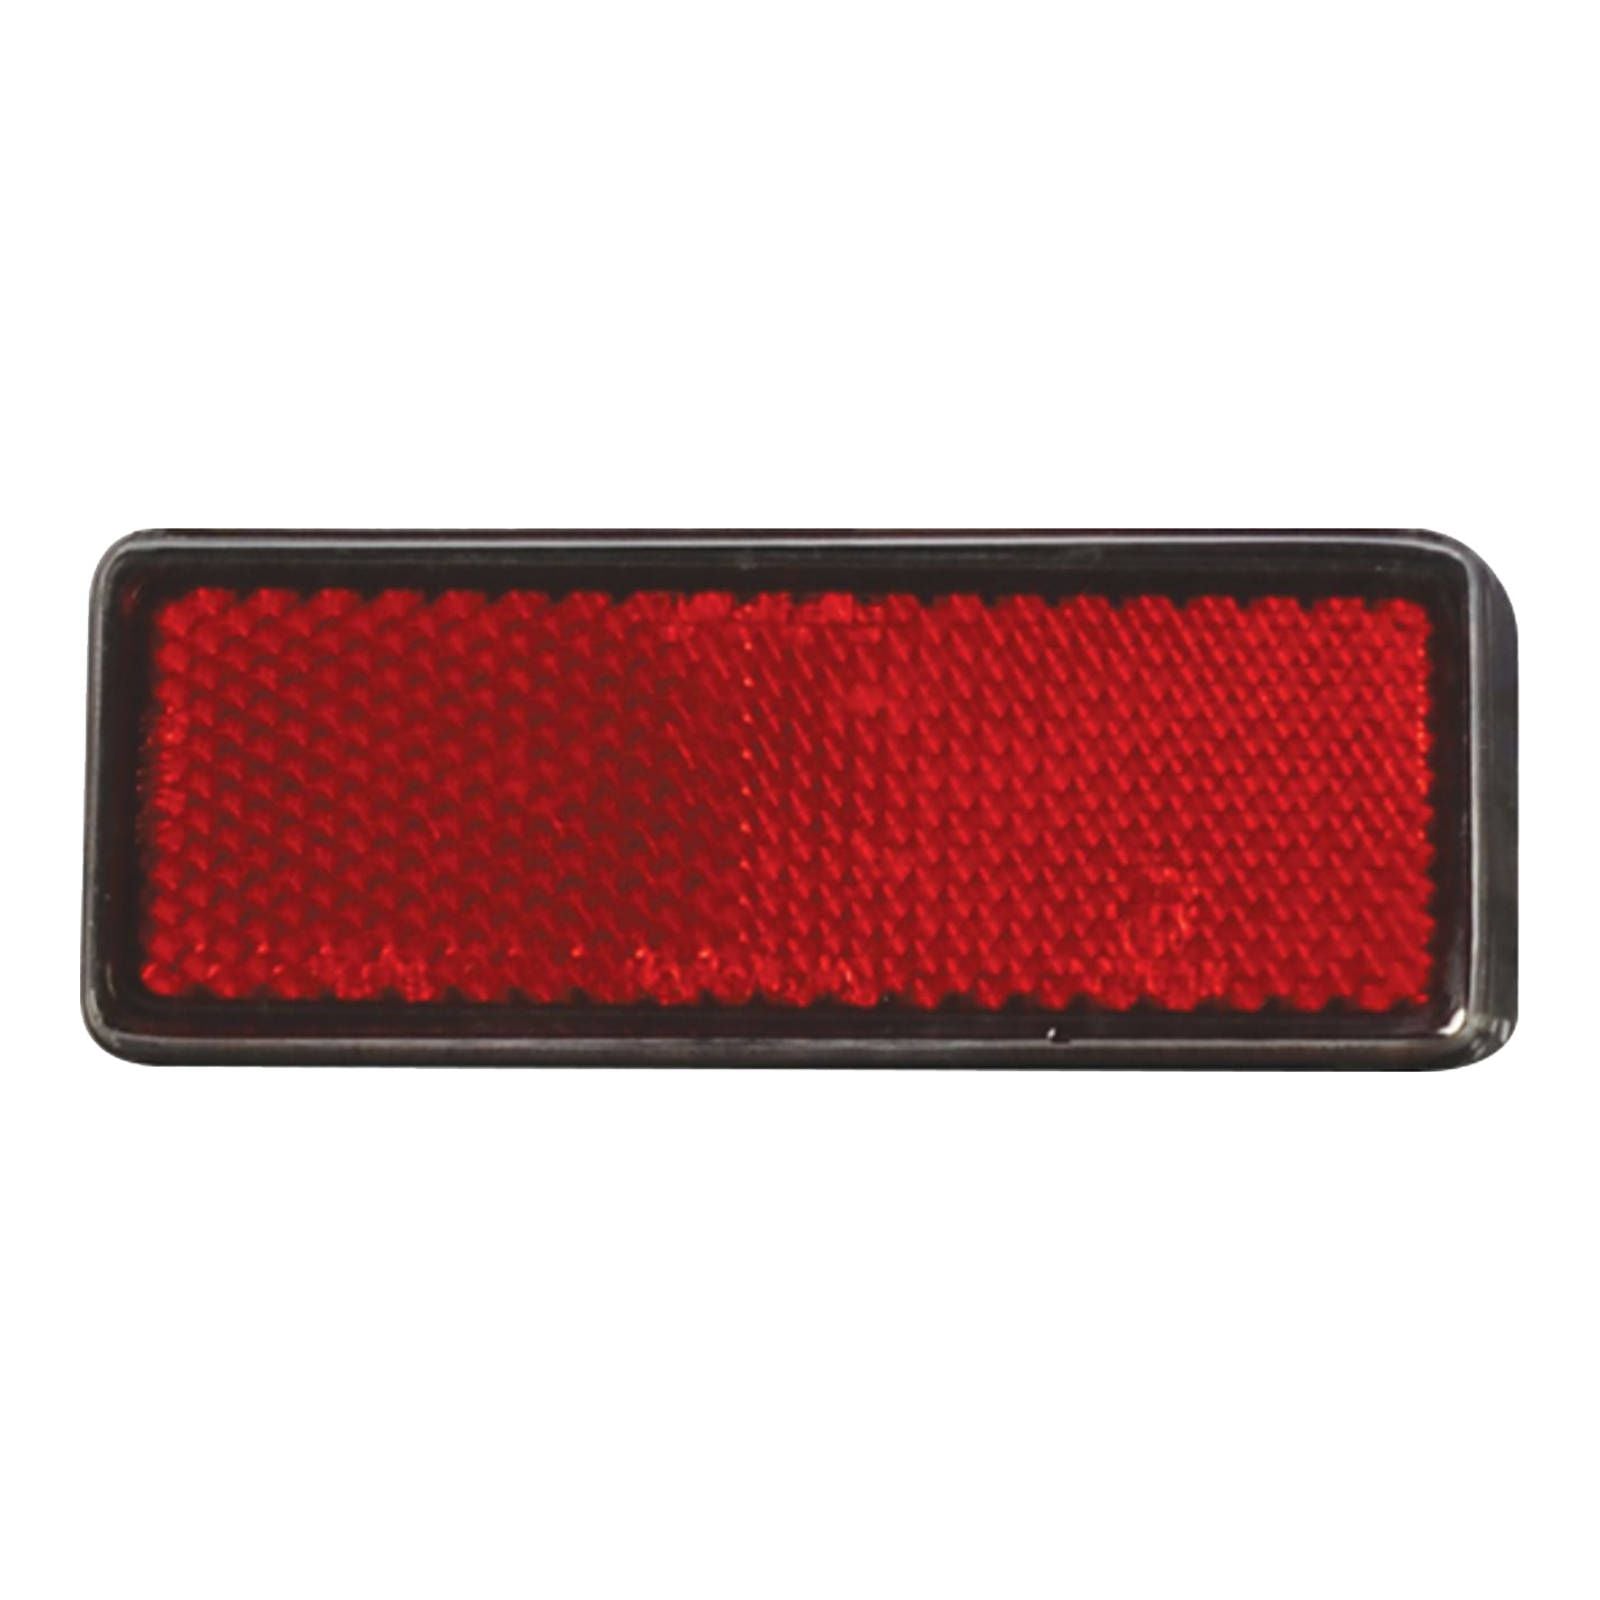 New OXFORD Reflectors Red Rectangular - Pair (Was Oxox110) #OXOX804